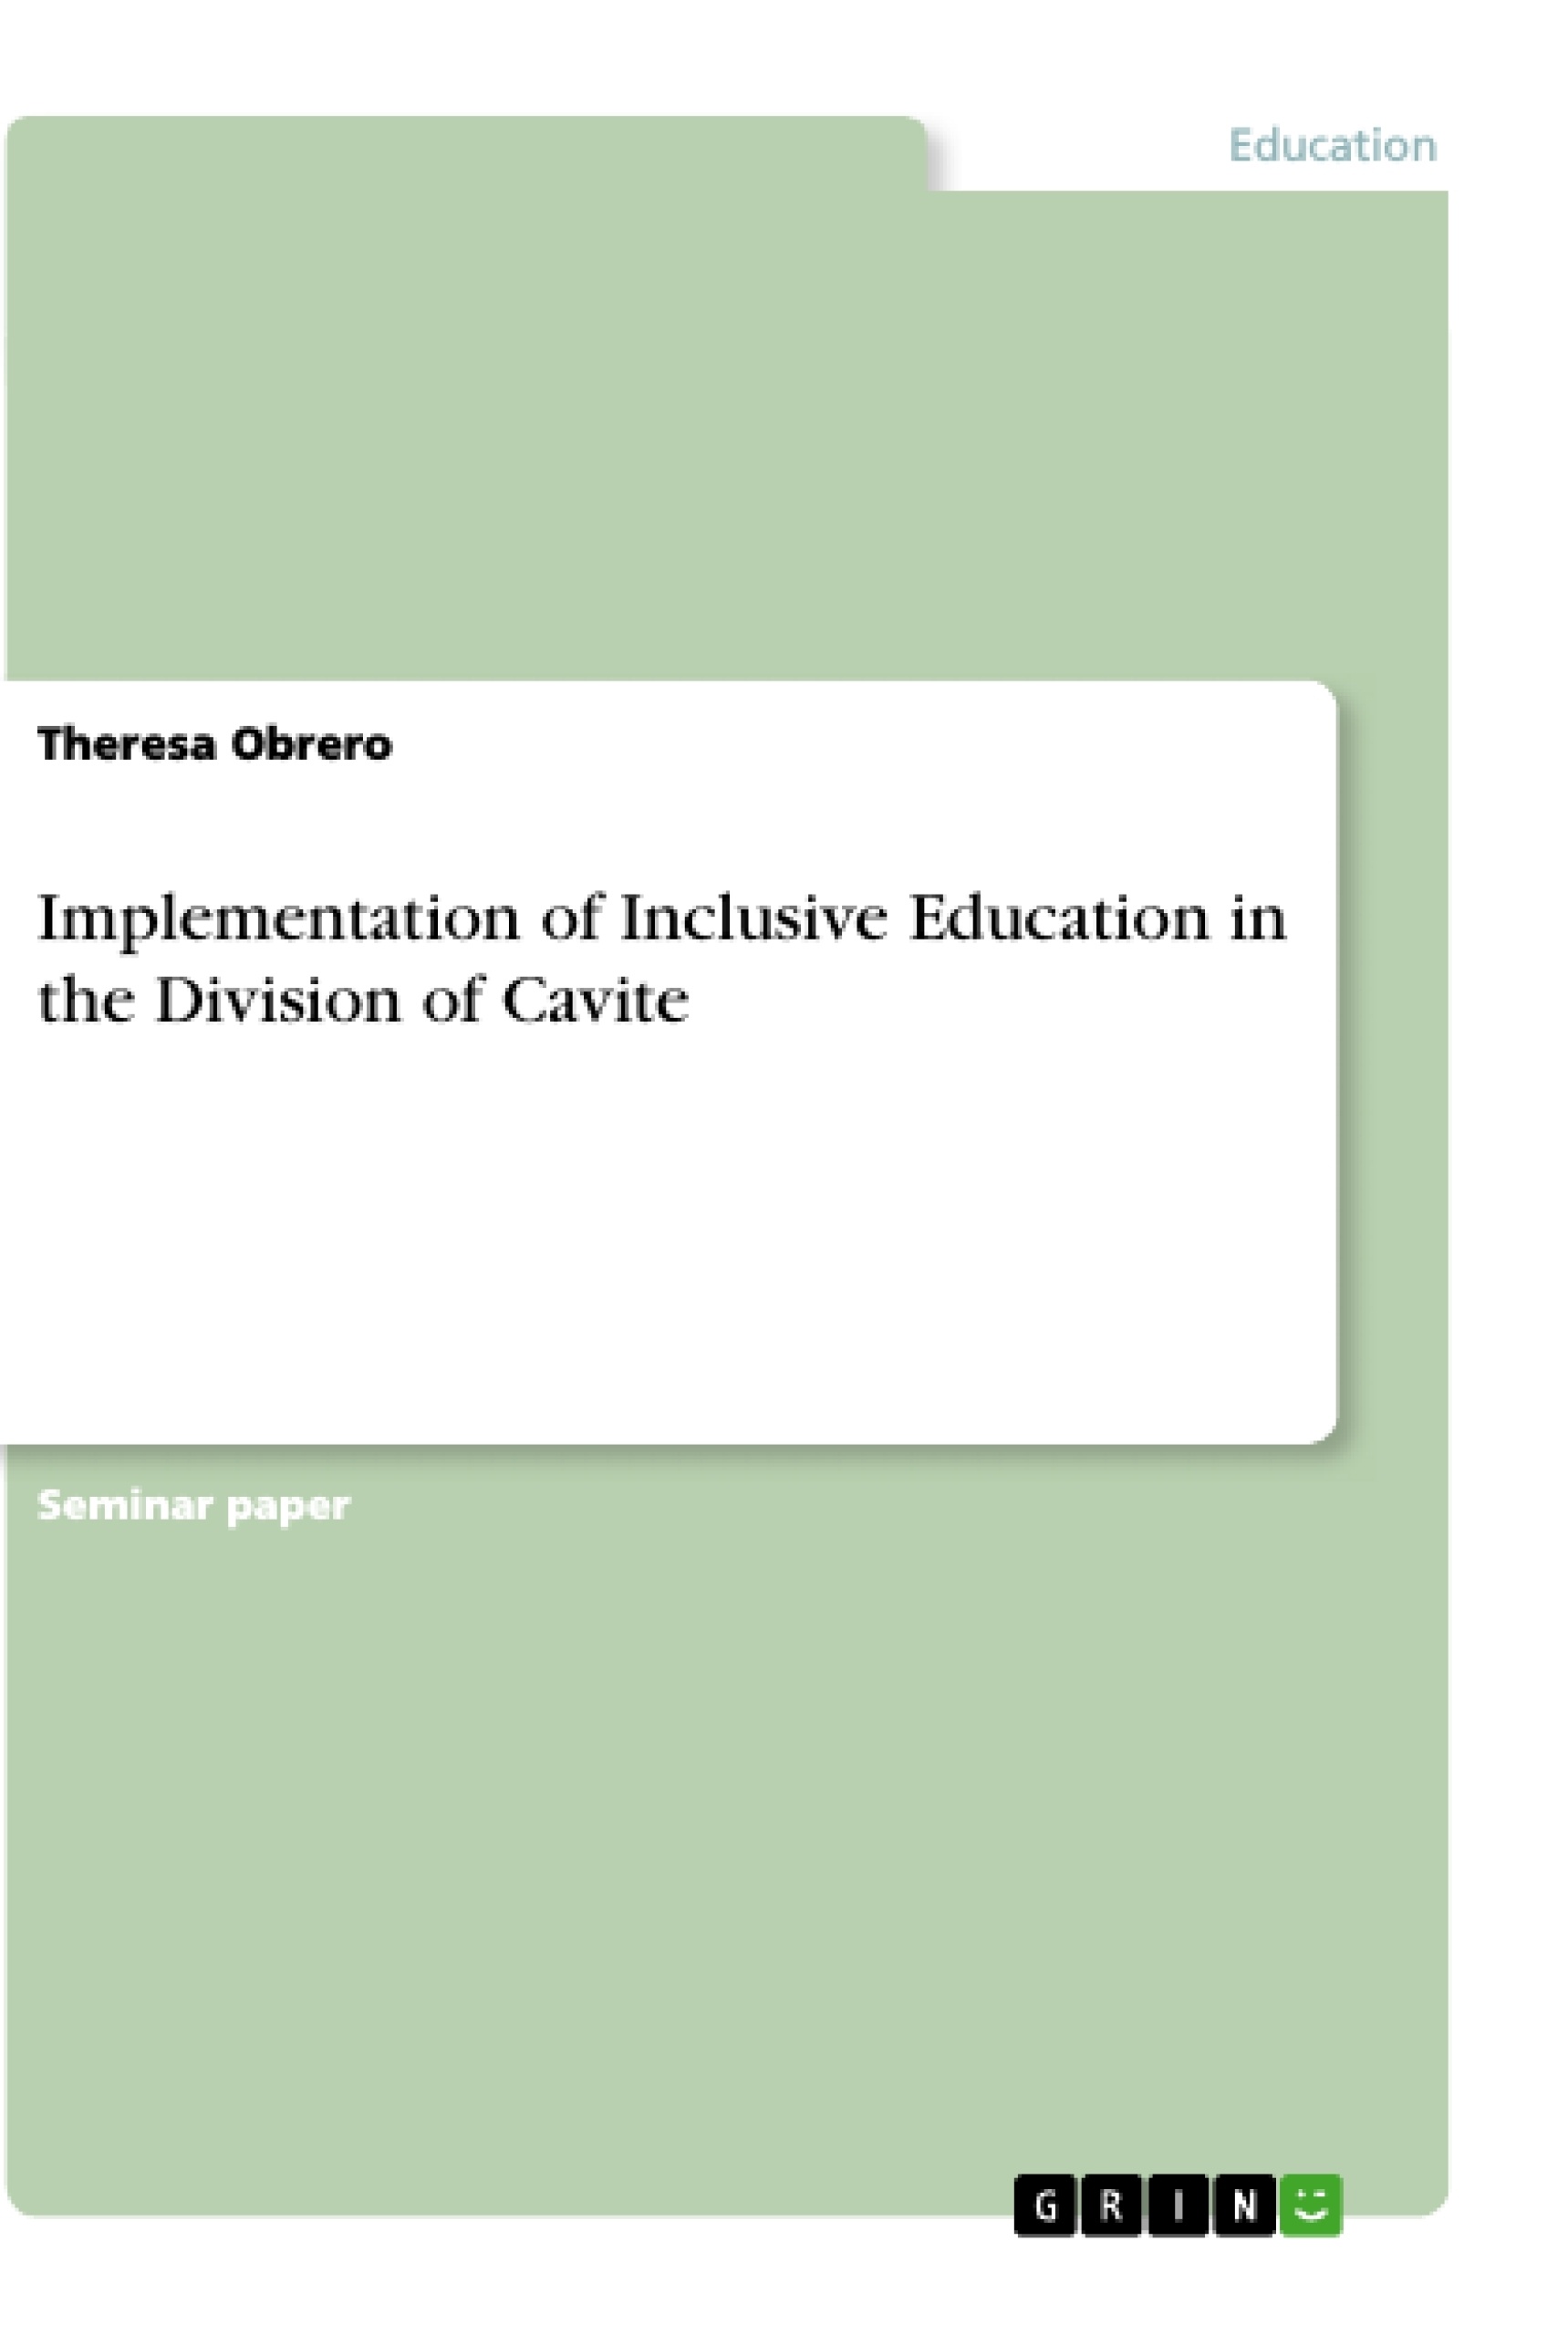 Title: Implementation of Inclusive Education in the Division of Cavite